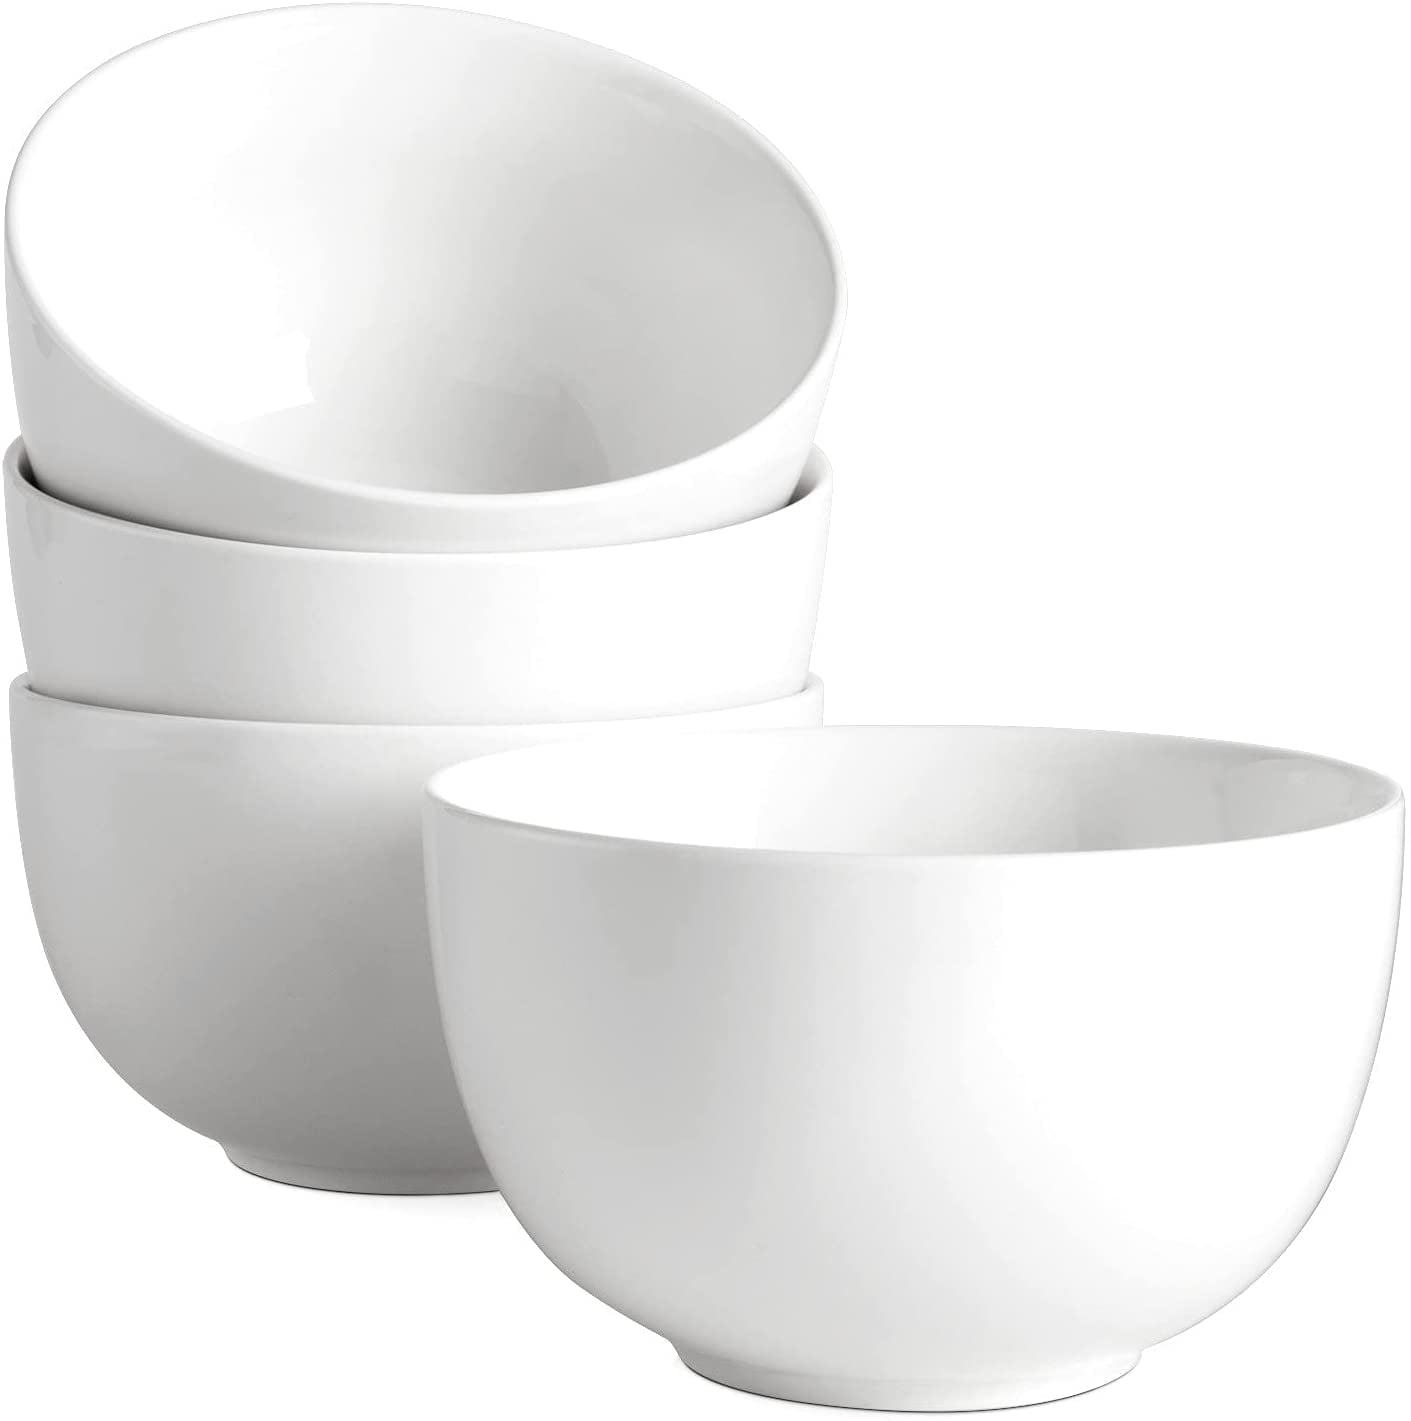 Wwyybfk 38oz Ceramic Soup Bowls, 7'' White Cereal Bowls Reusable Porcelain Bowl Set with Heat Insulation Pads Dishwasher & Microwave Safe for Home